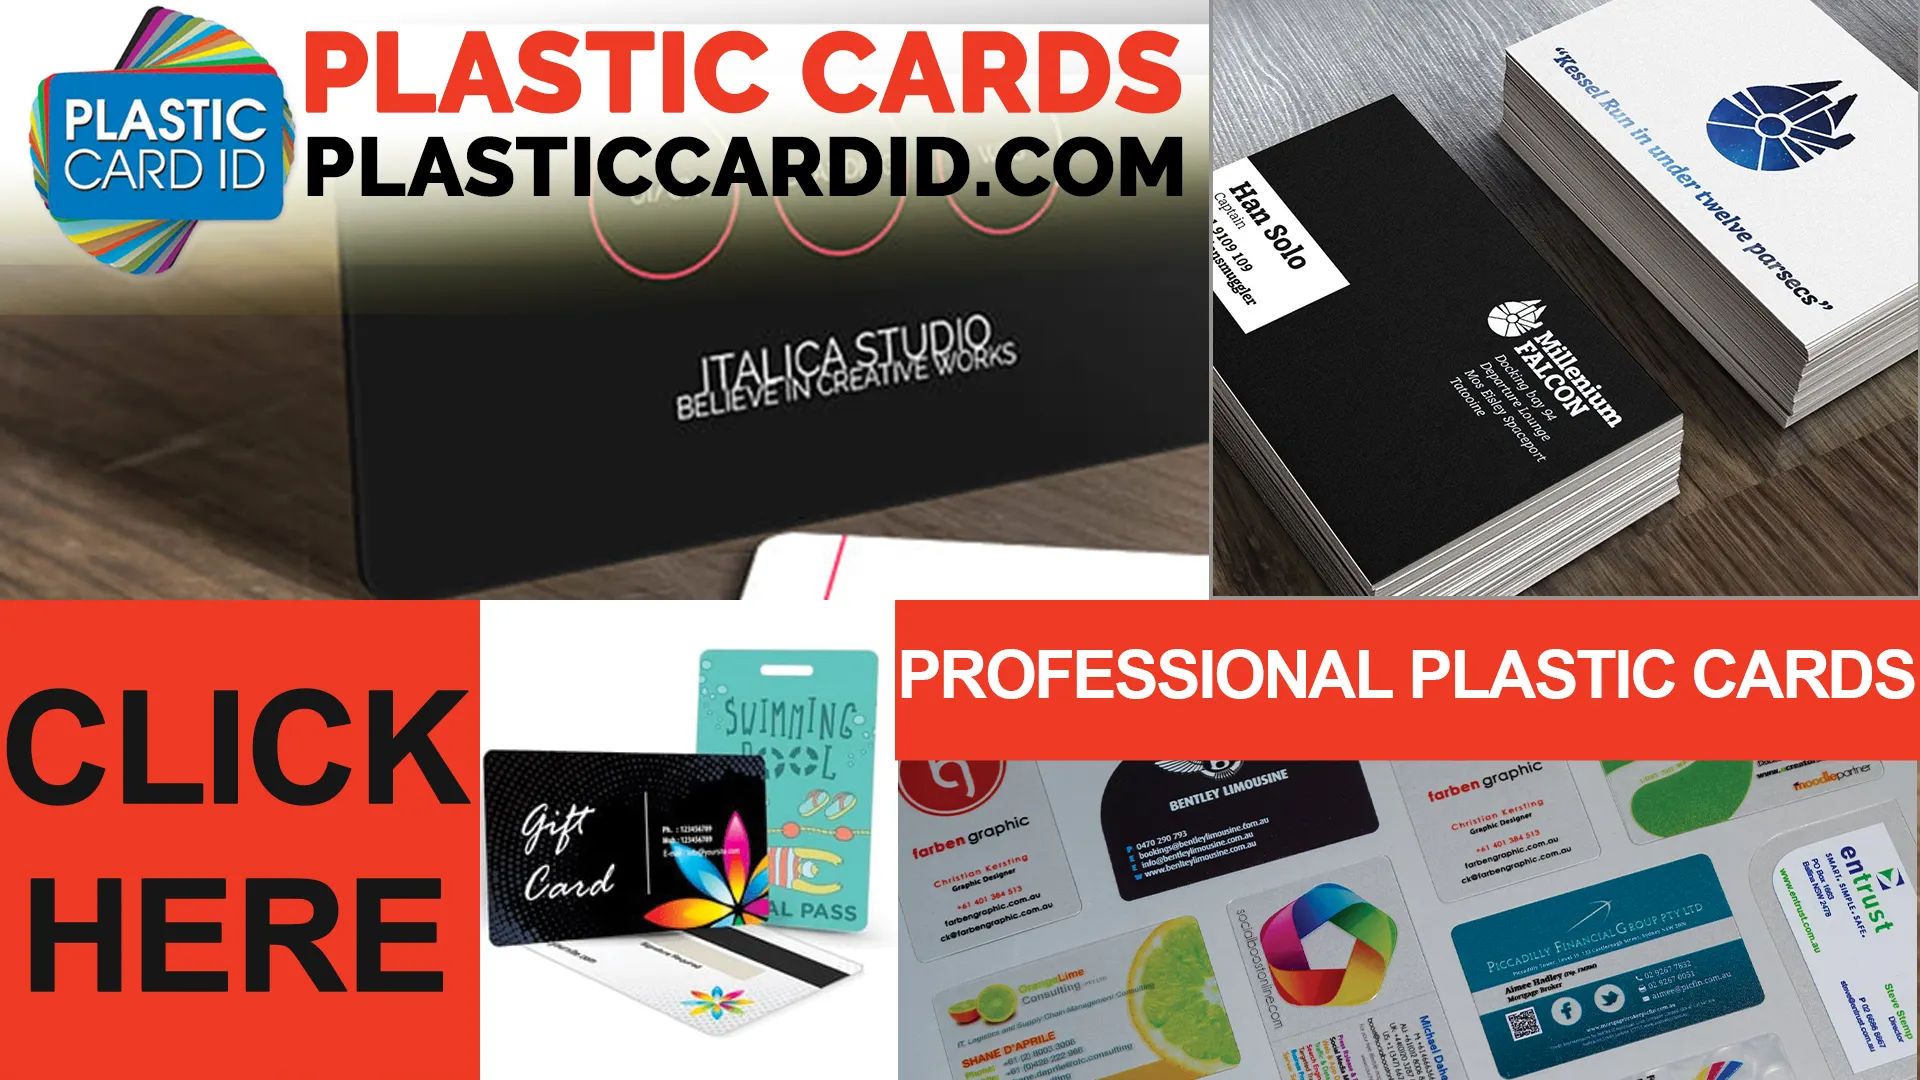 Enduring Quality: Our Plastic Cards Last Longer